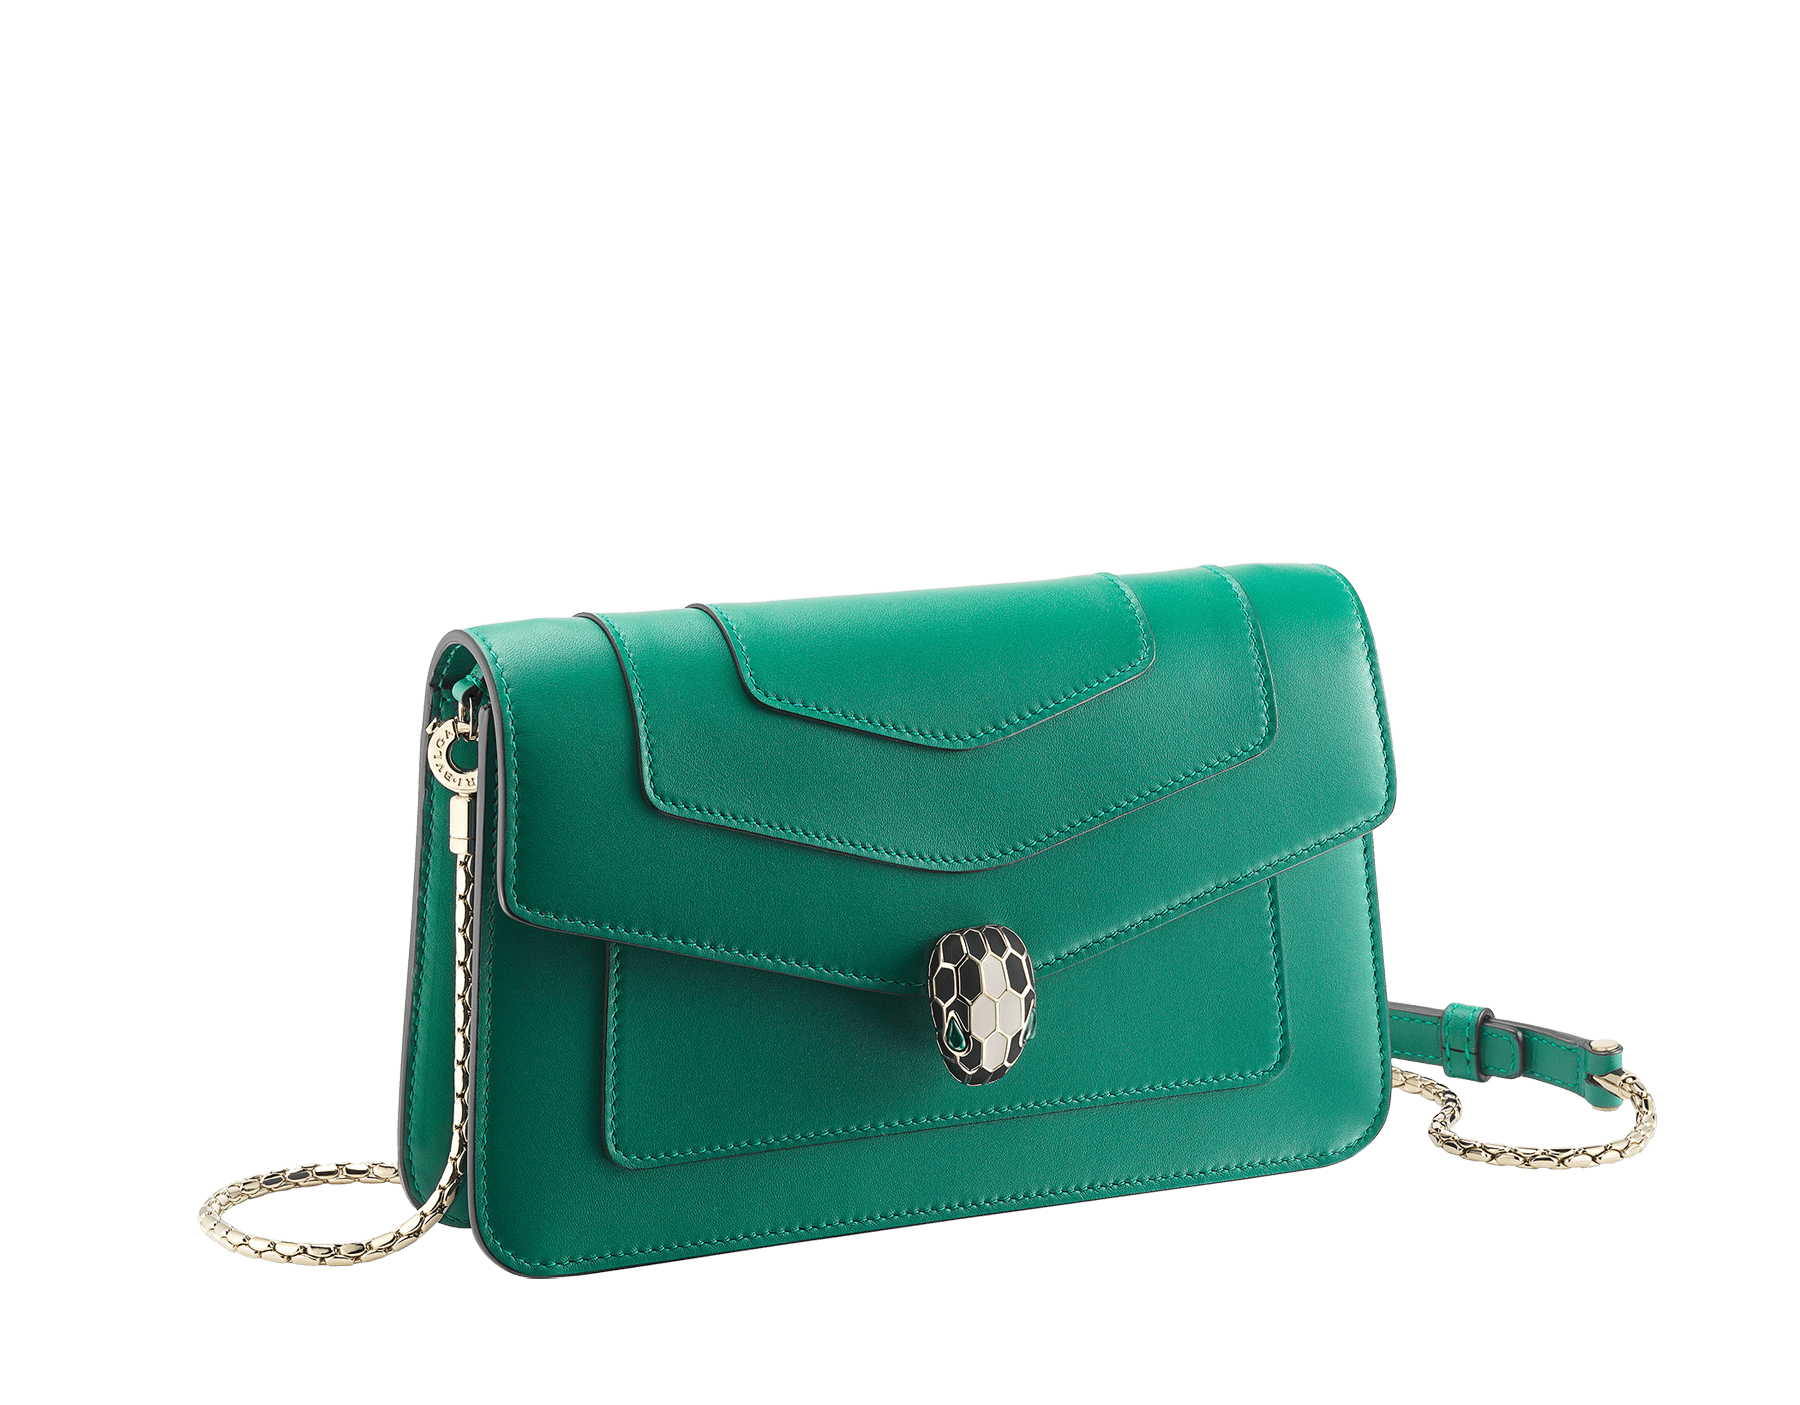 Serpenti Forever chain wallet in Niagara sapphire blue calf leather with silky coral pink nappa leather interior. Captivating palladium-plated brass snakehead magnetic closure embellished with black and Niagara sapphire blue enamel scales and black onyx eyes. SEA-CHAINPOCHETTE-LCL image 1